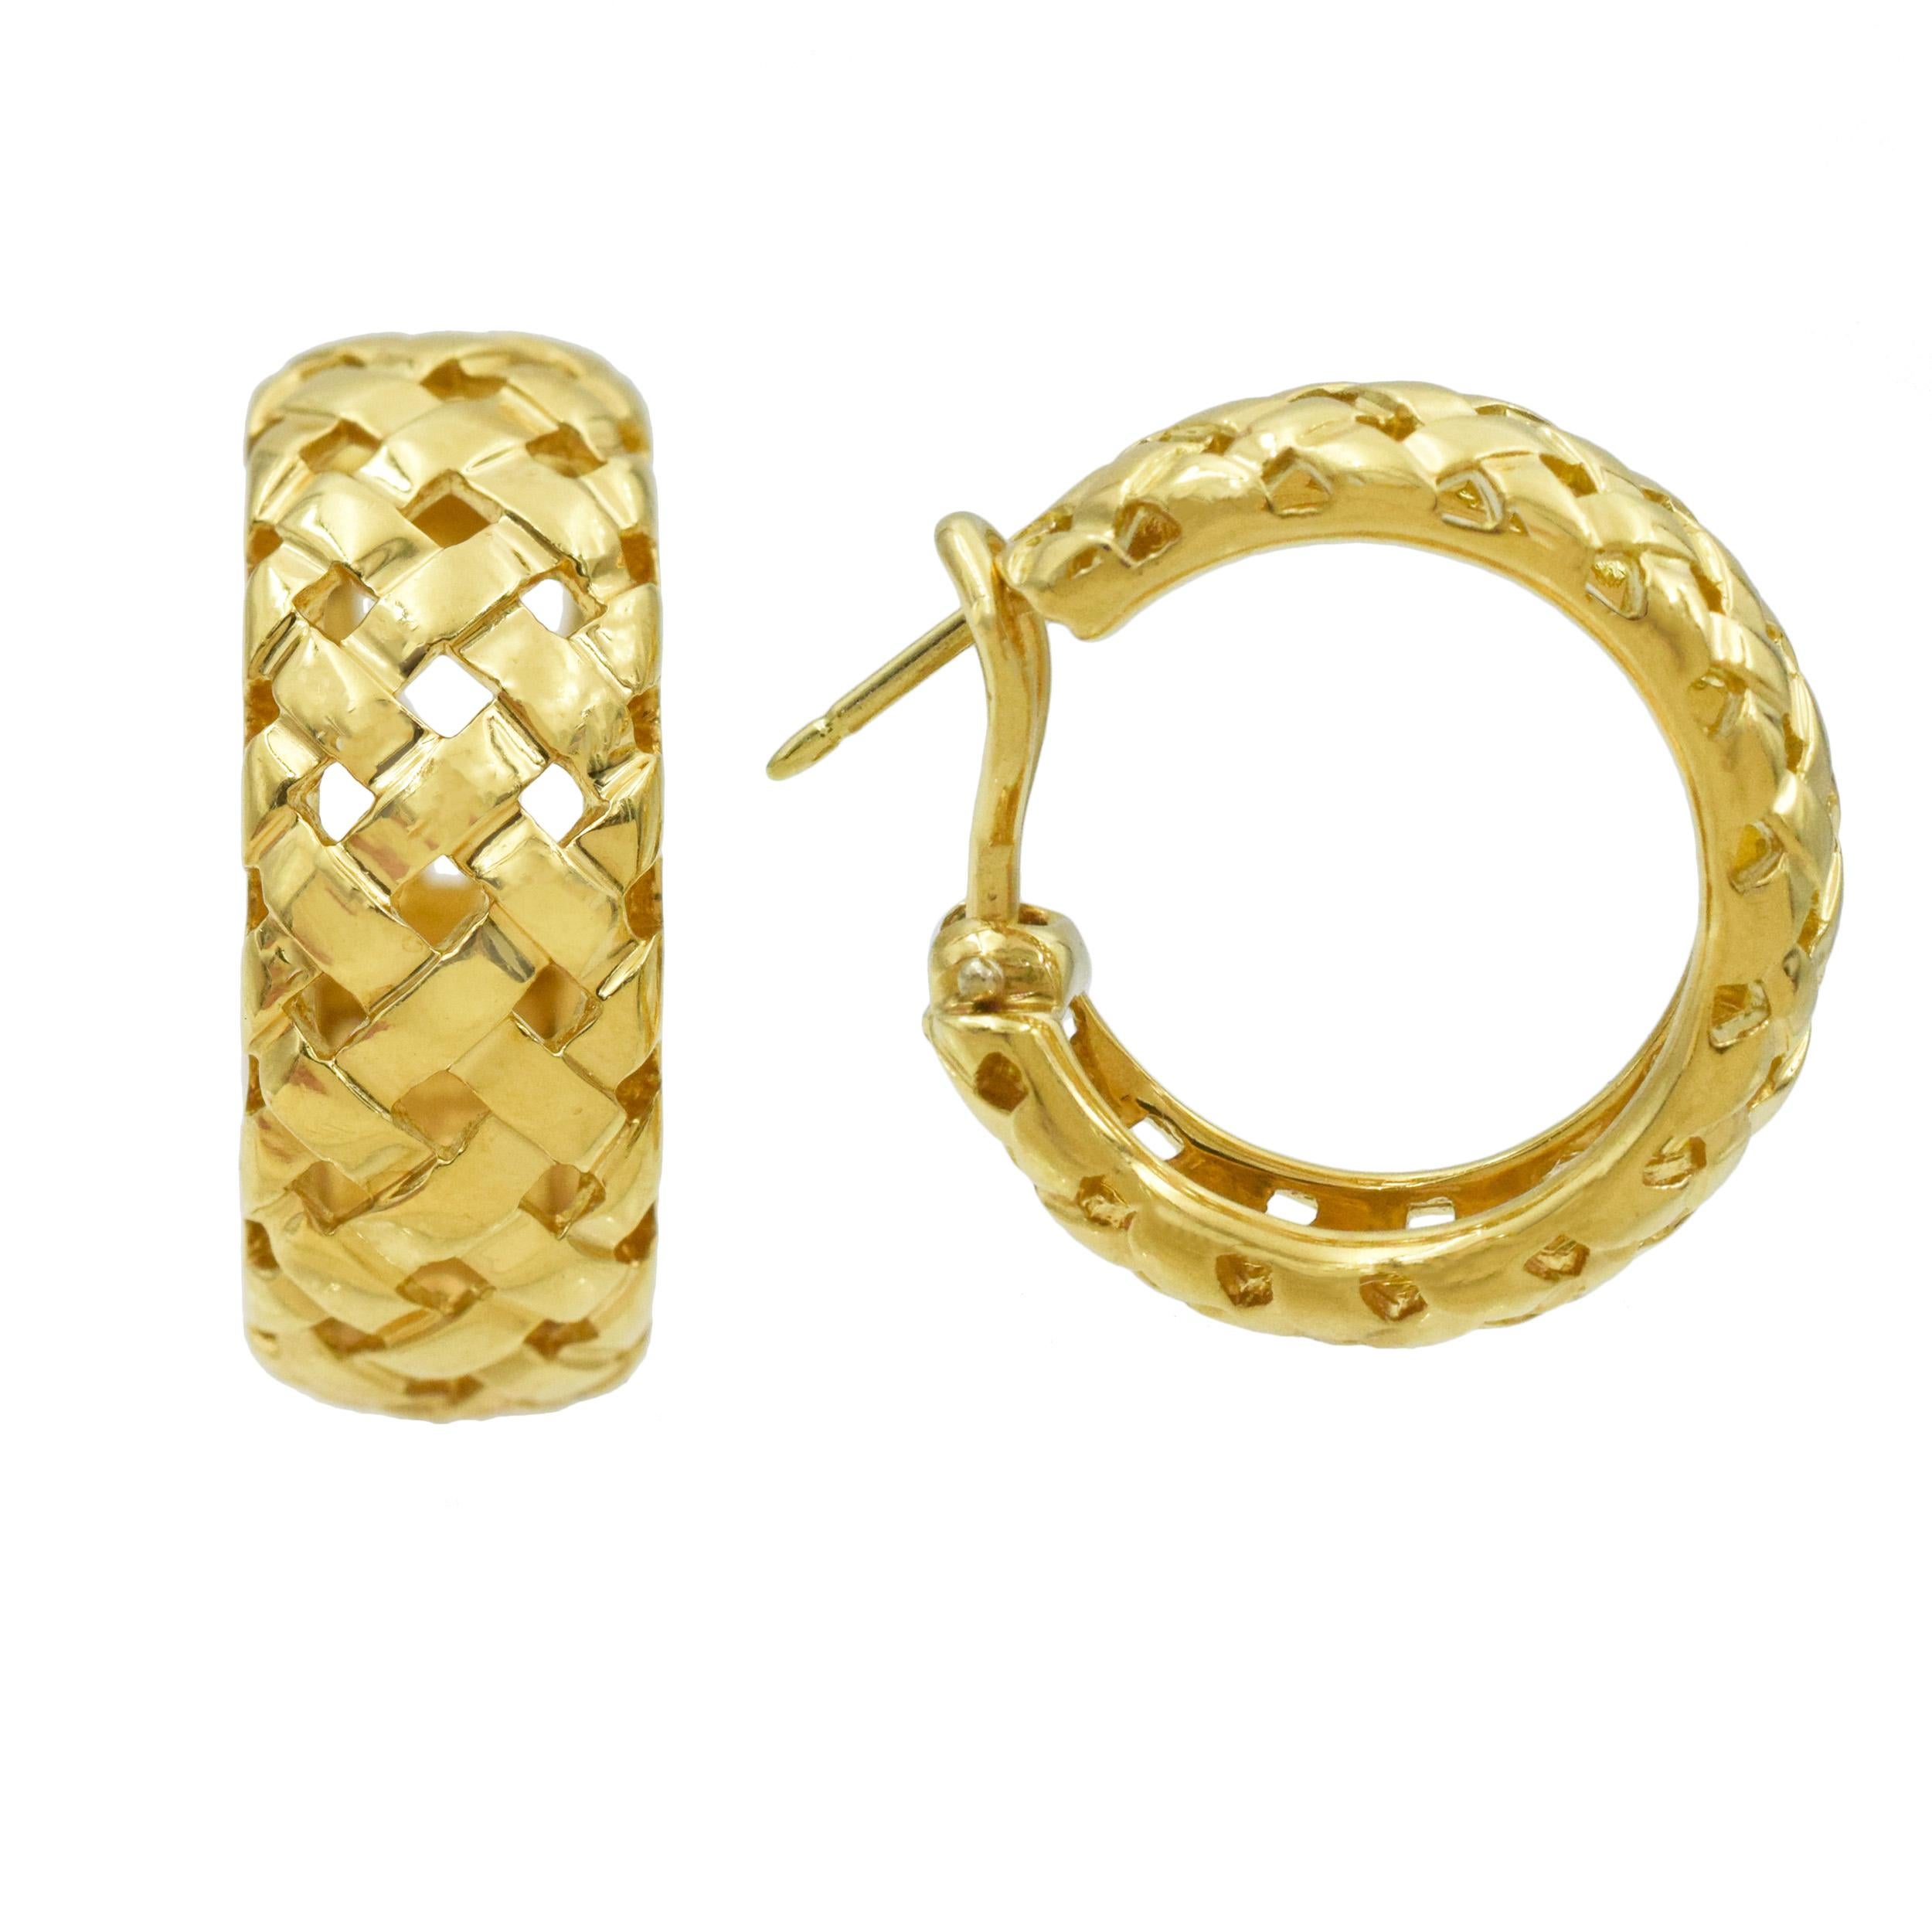 Tiffany & Co. Group of Gold 'Vannerie' Bracelet, Ring, and Earrings Set For Sale 10